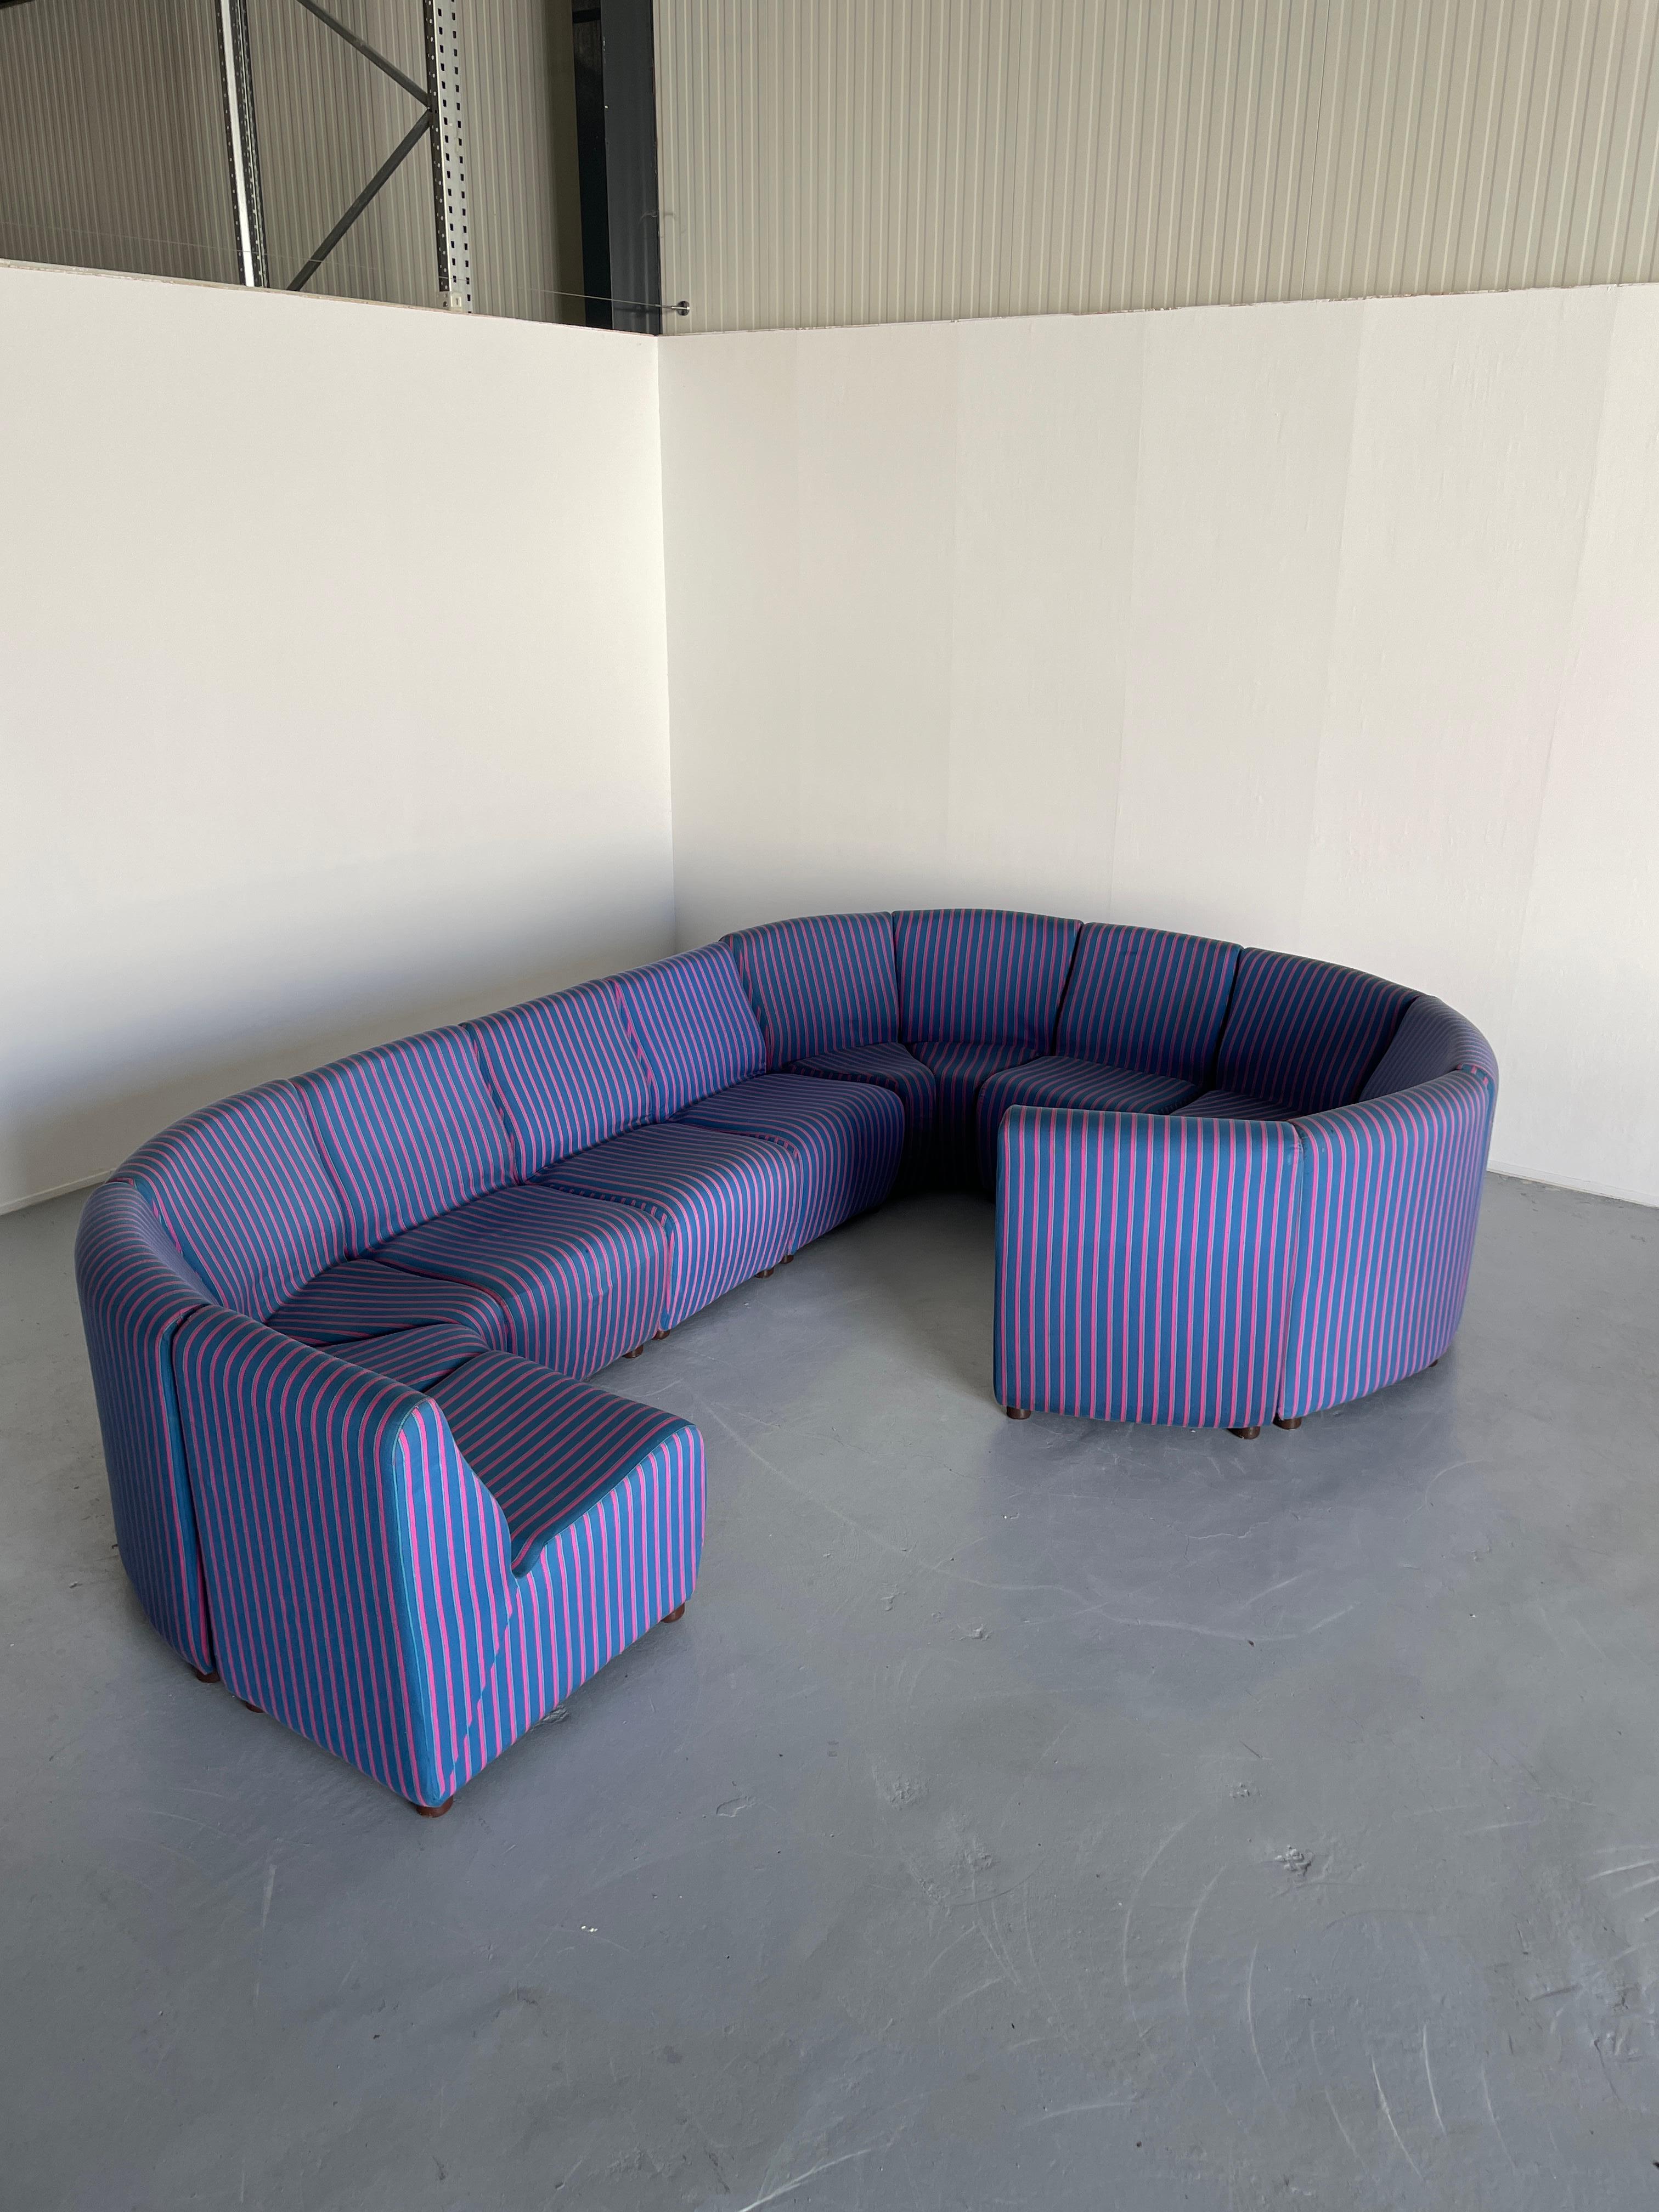 A stunning thirteen-piece Mid-Century-Modern modular serpentine sofa in blue striped upholstery. 

Made from moulded foam and a metal construction. Lightweight.

In very good vintage condition with expected signs of age. 
No tears on the fabric. No